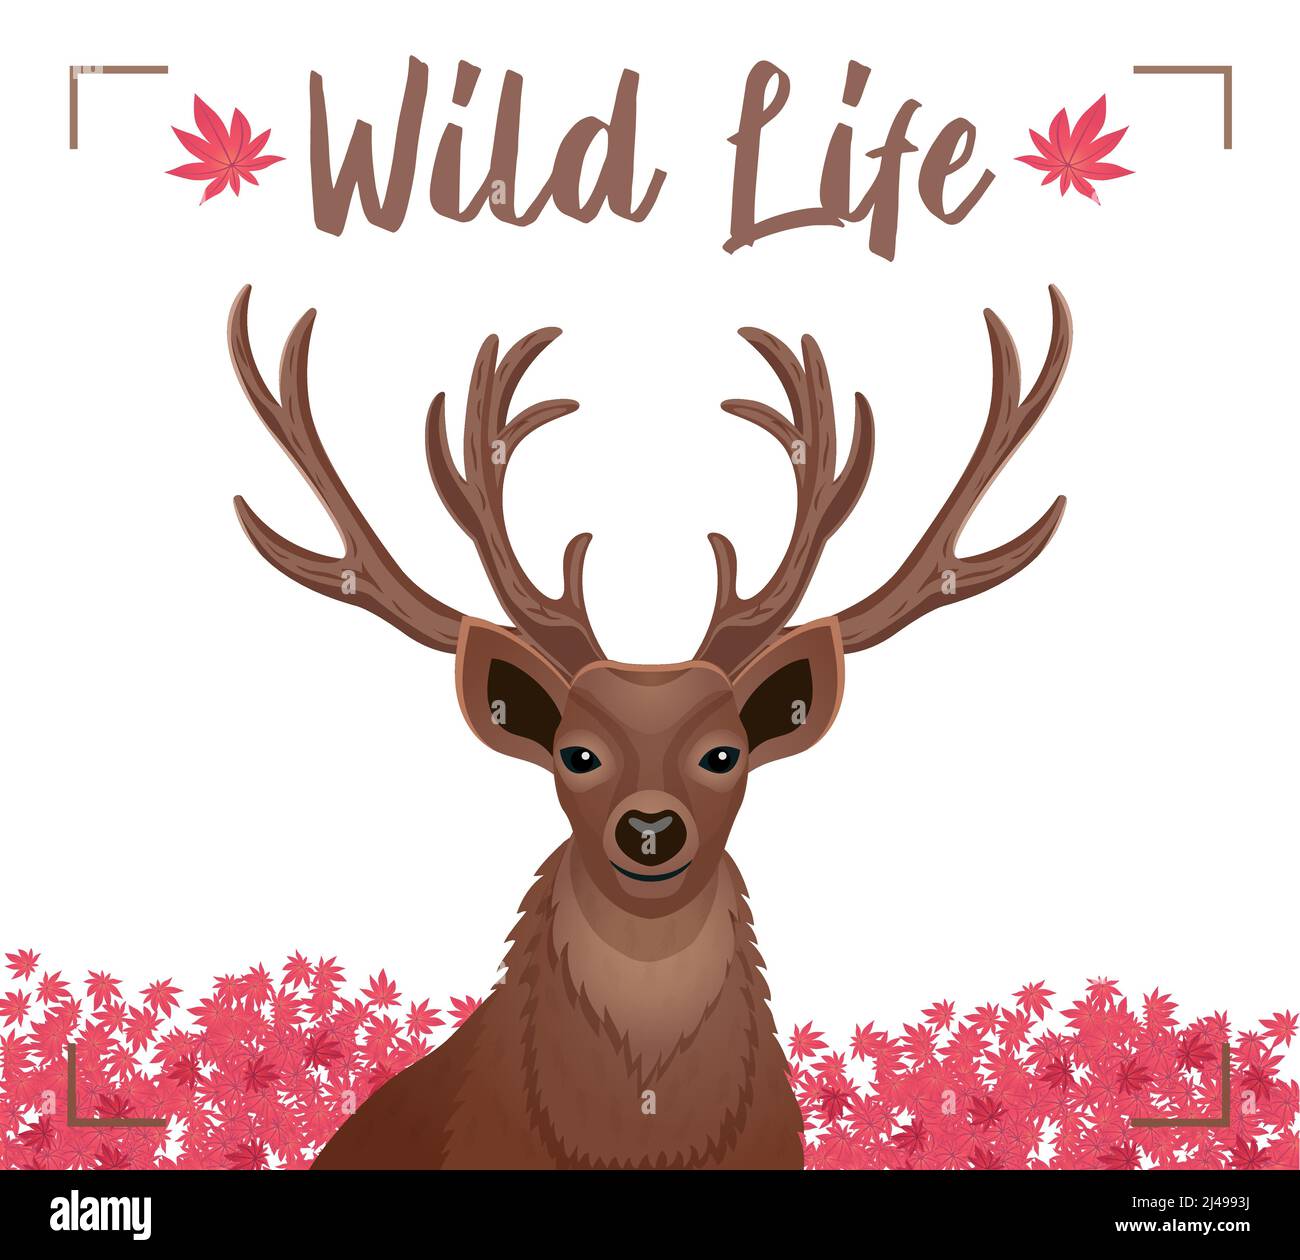 Wild life decorative poster with closeup dear head with horns antlers pink flowers background flat vector illustration Stock Vector